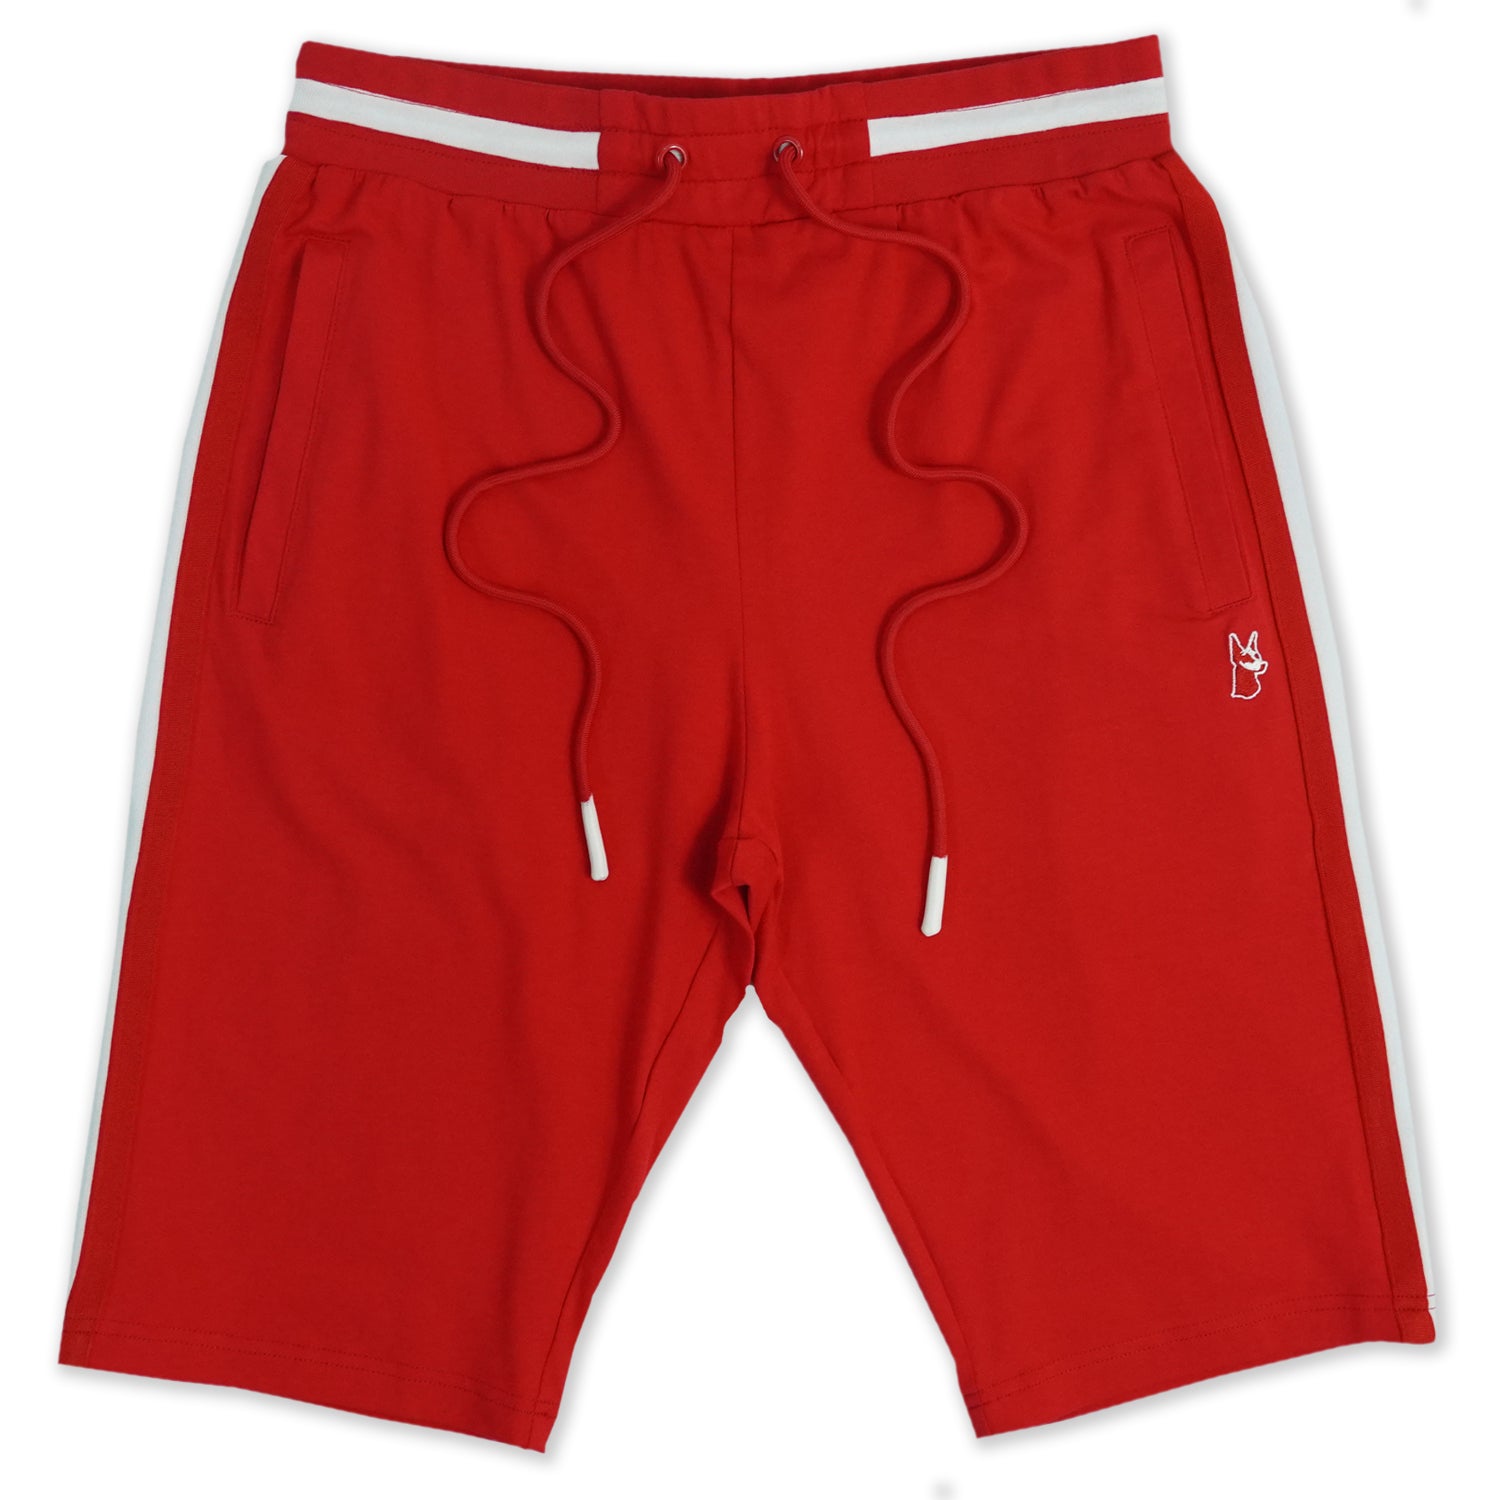 M600 Knit Shorts - Red